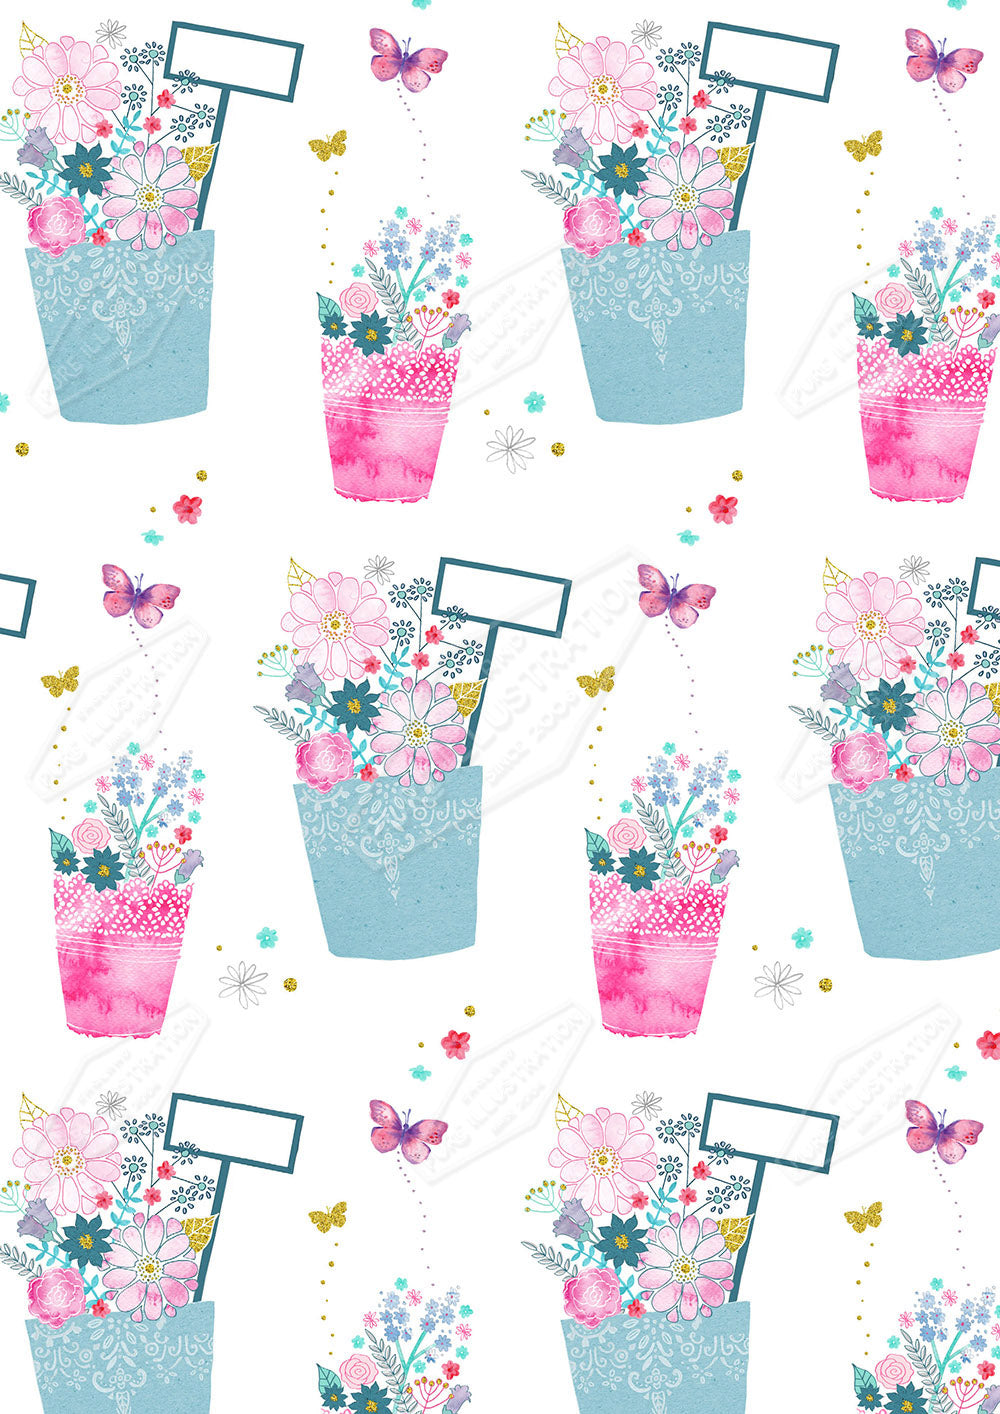 Birthday Gardening Pots Pattern Design by Victoria Marks for Pure Art Licensing Agency & Surface Design Studio